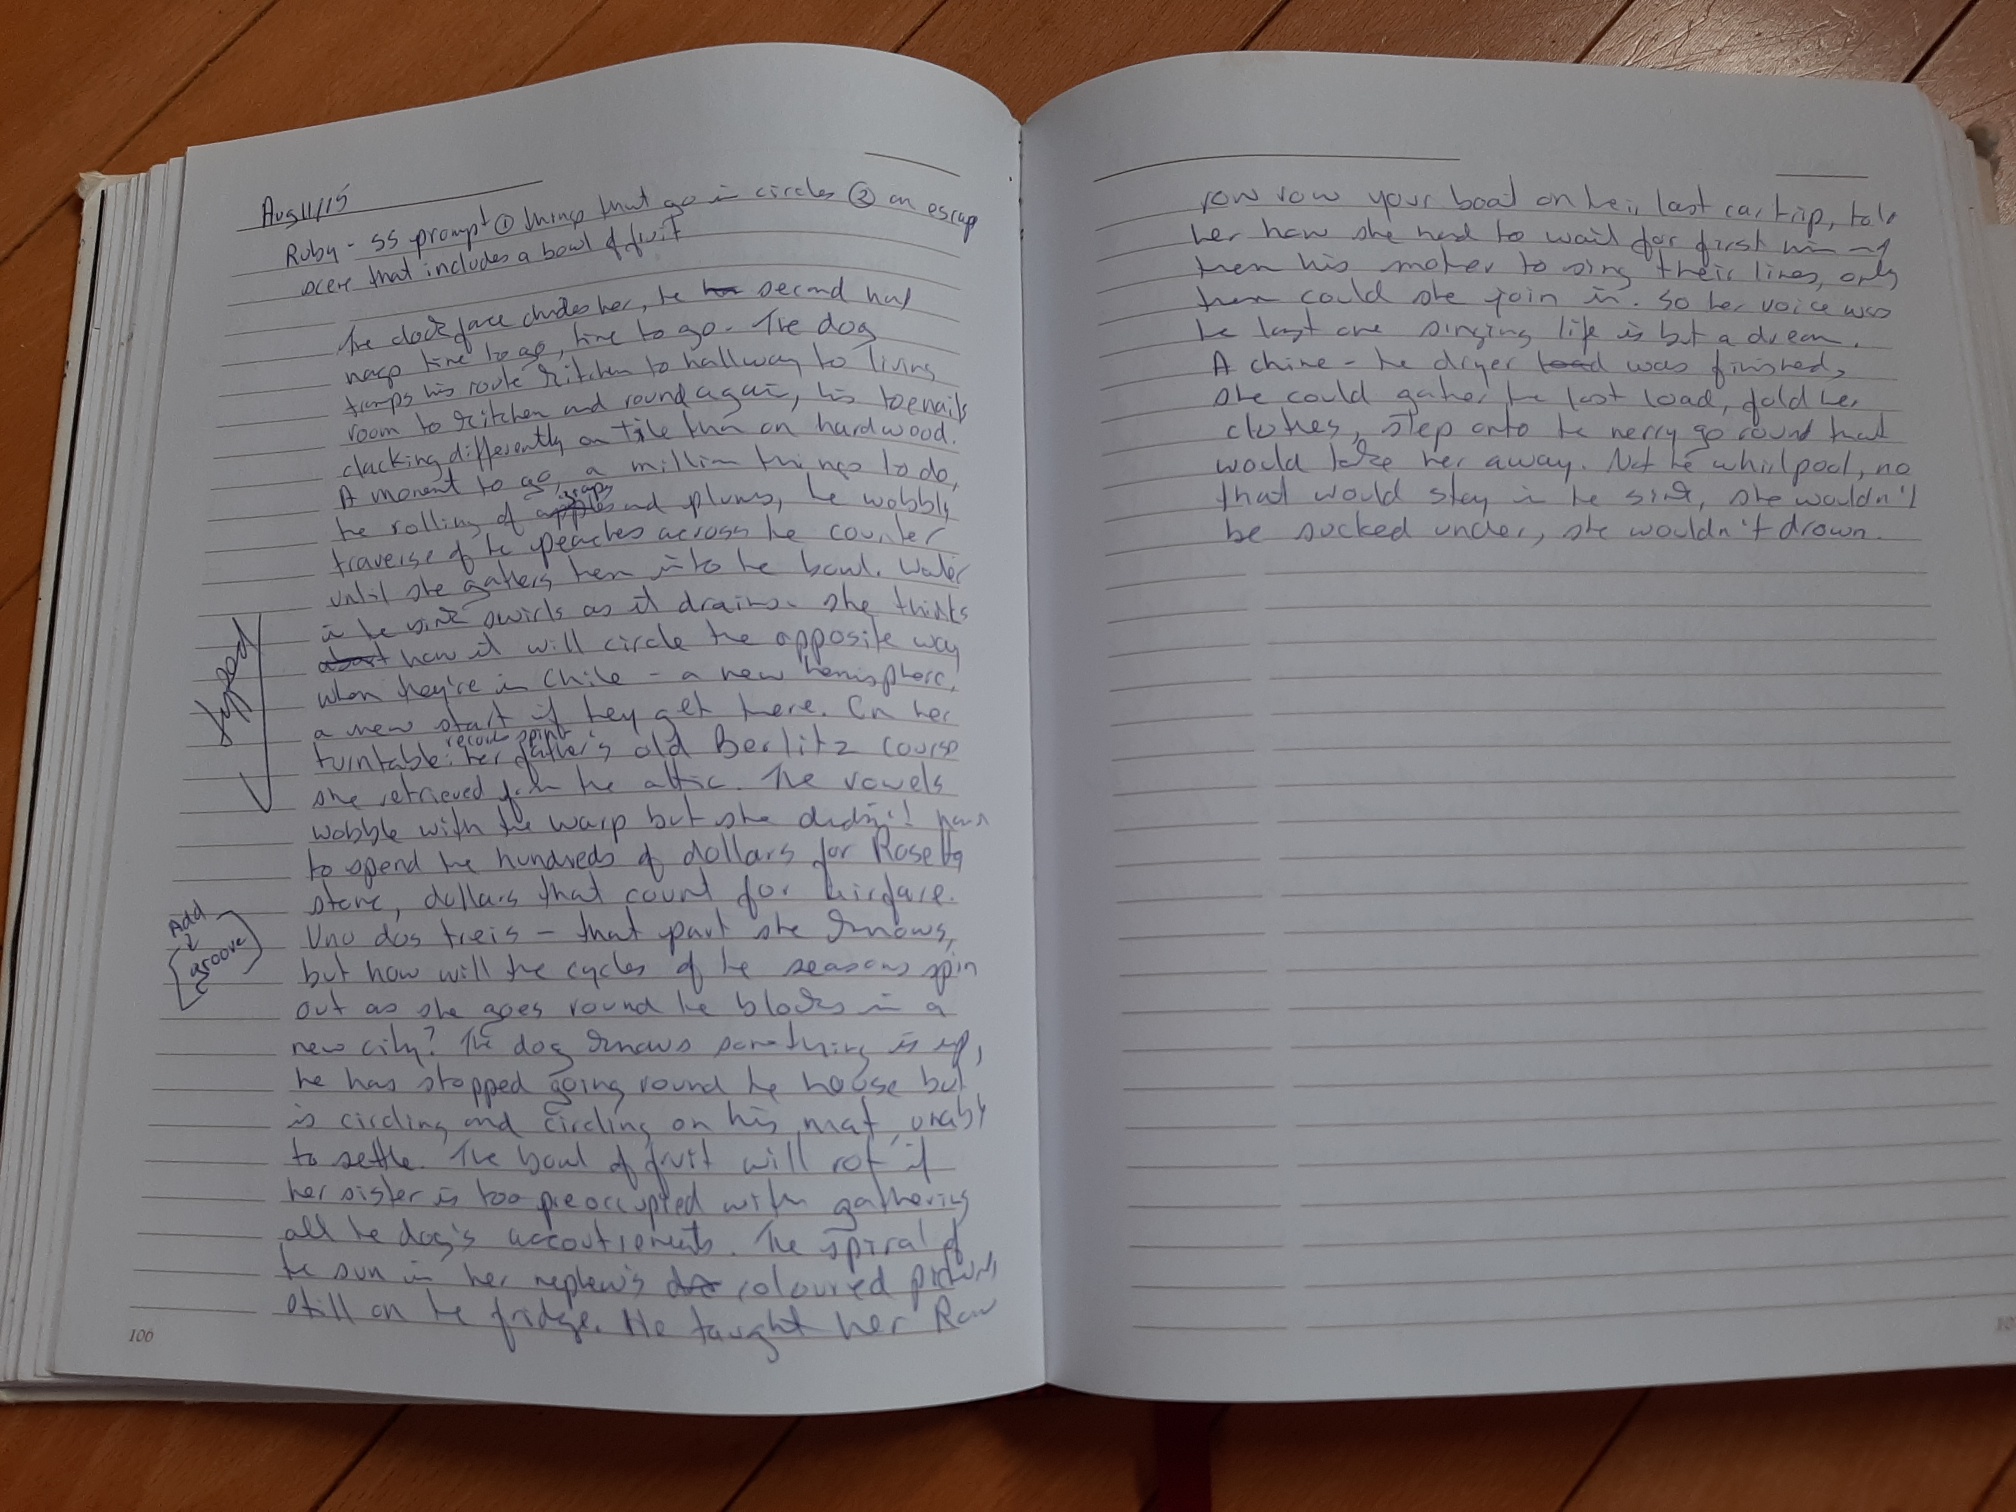 Photo of the author's notebook, open to the page where she brainstormed the poem, "Rounds."